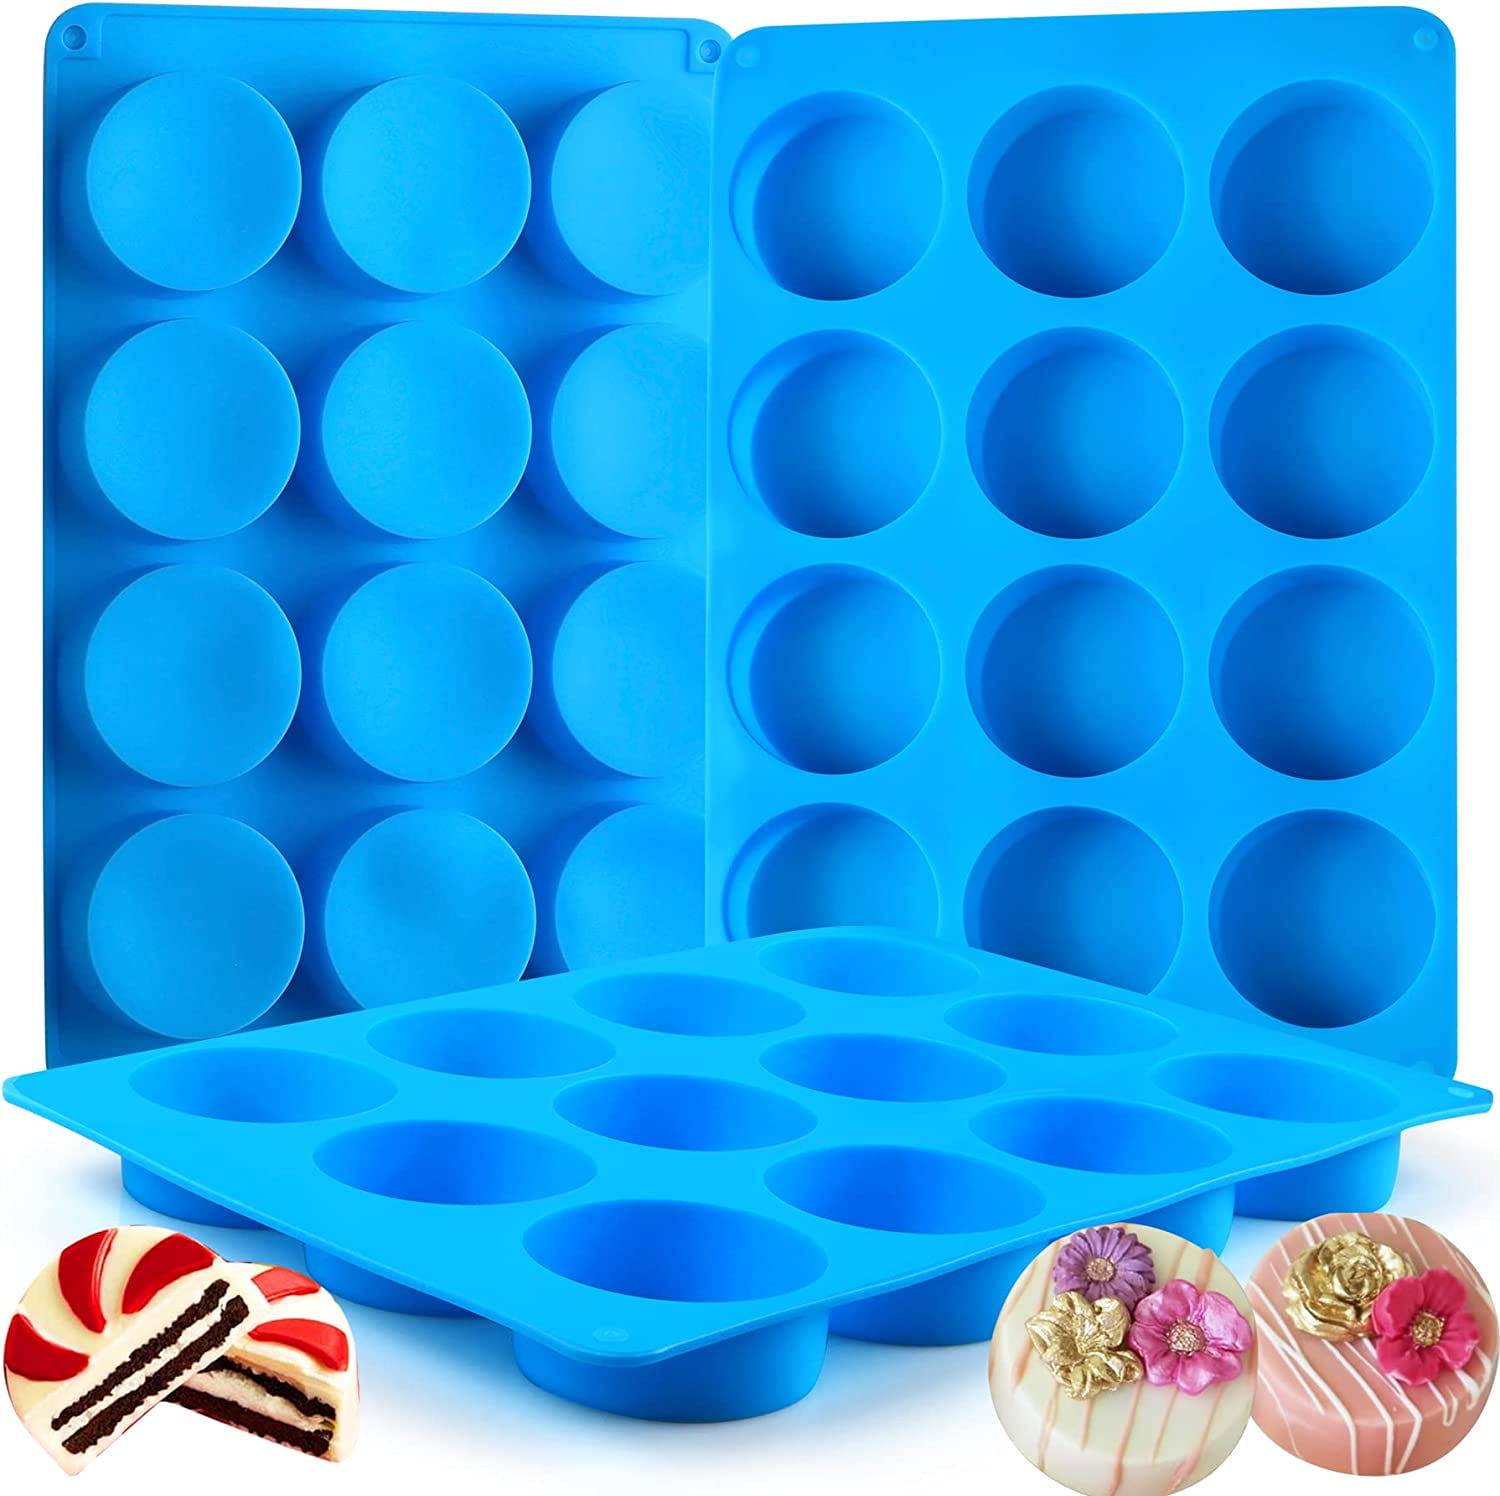 Cupcake Large Silicone Cookie Mold – Artesão Cookie Molds